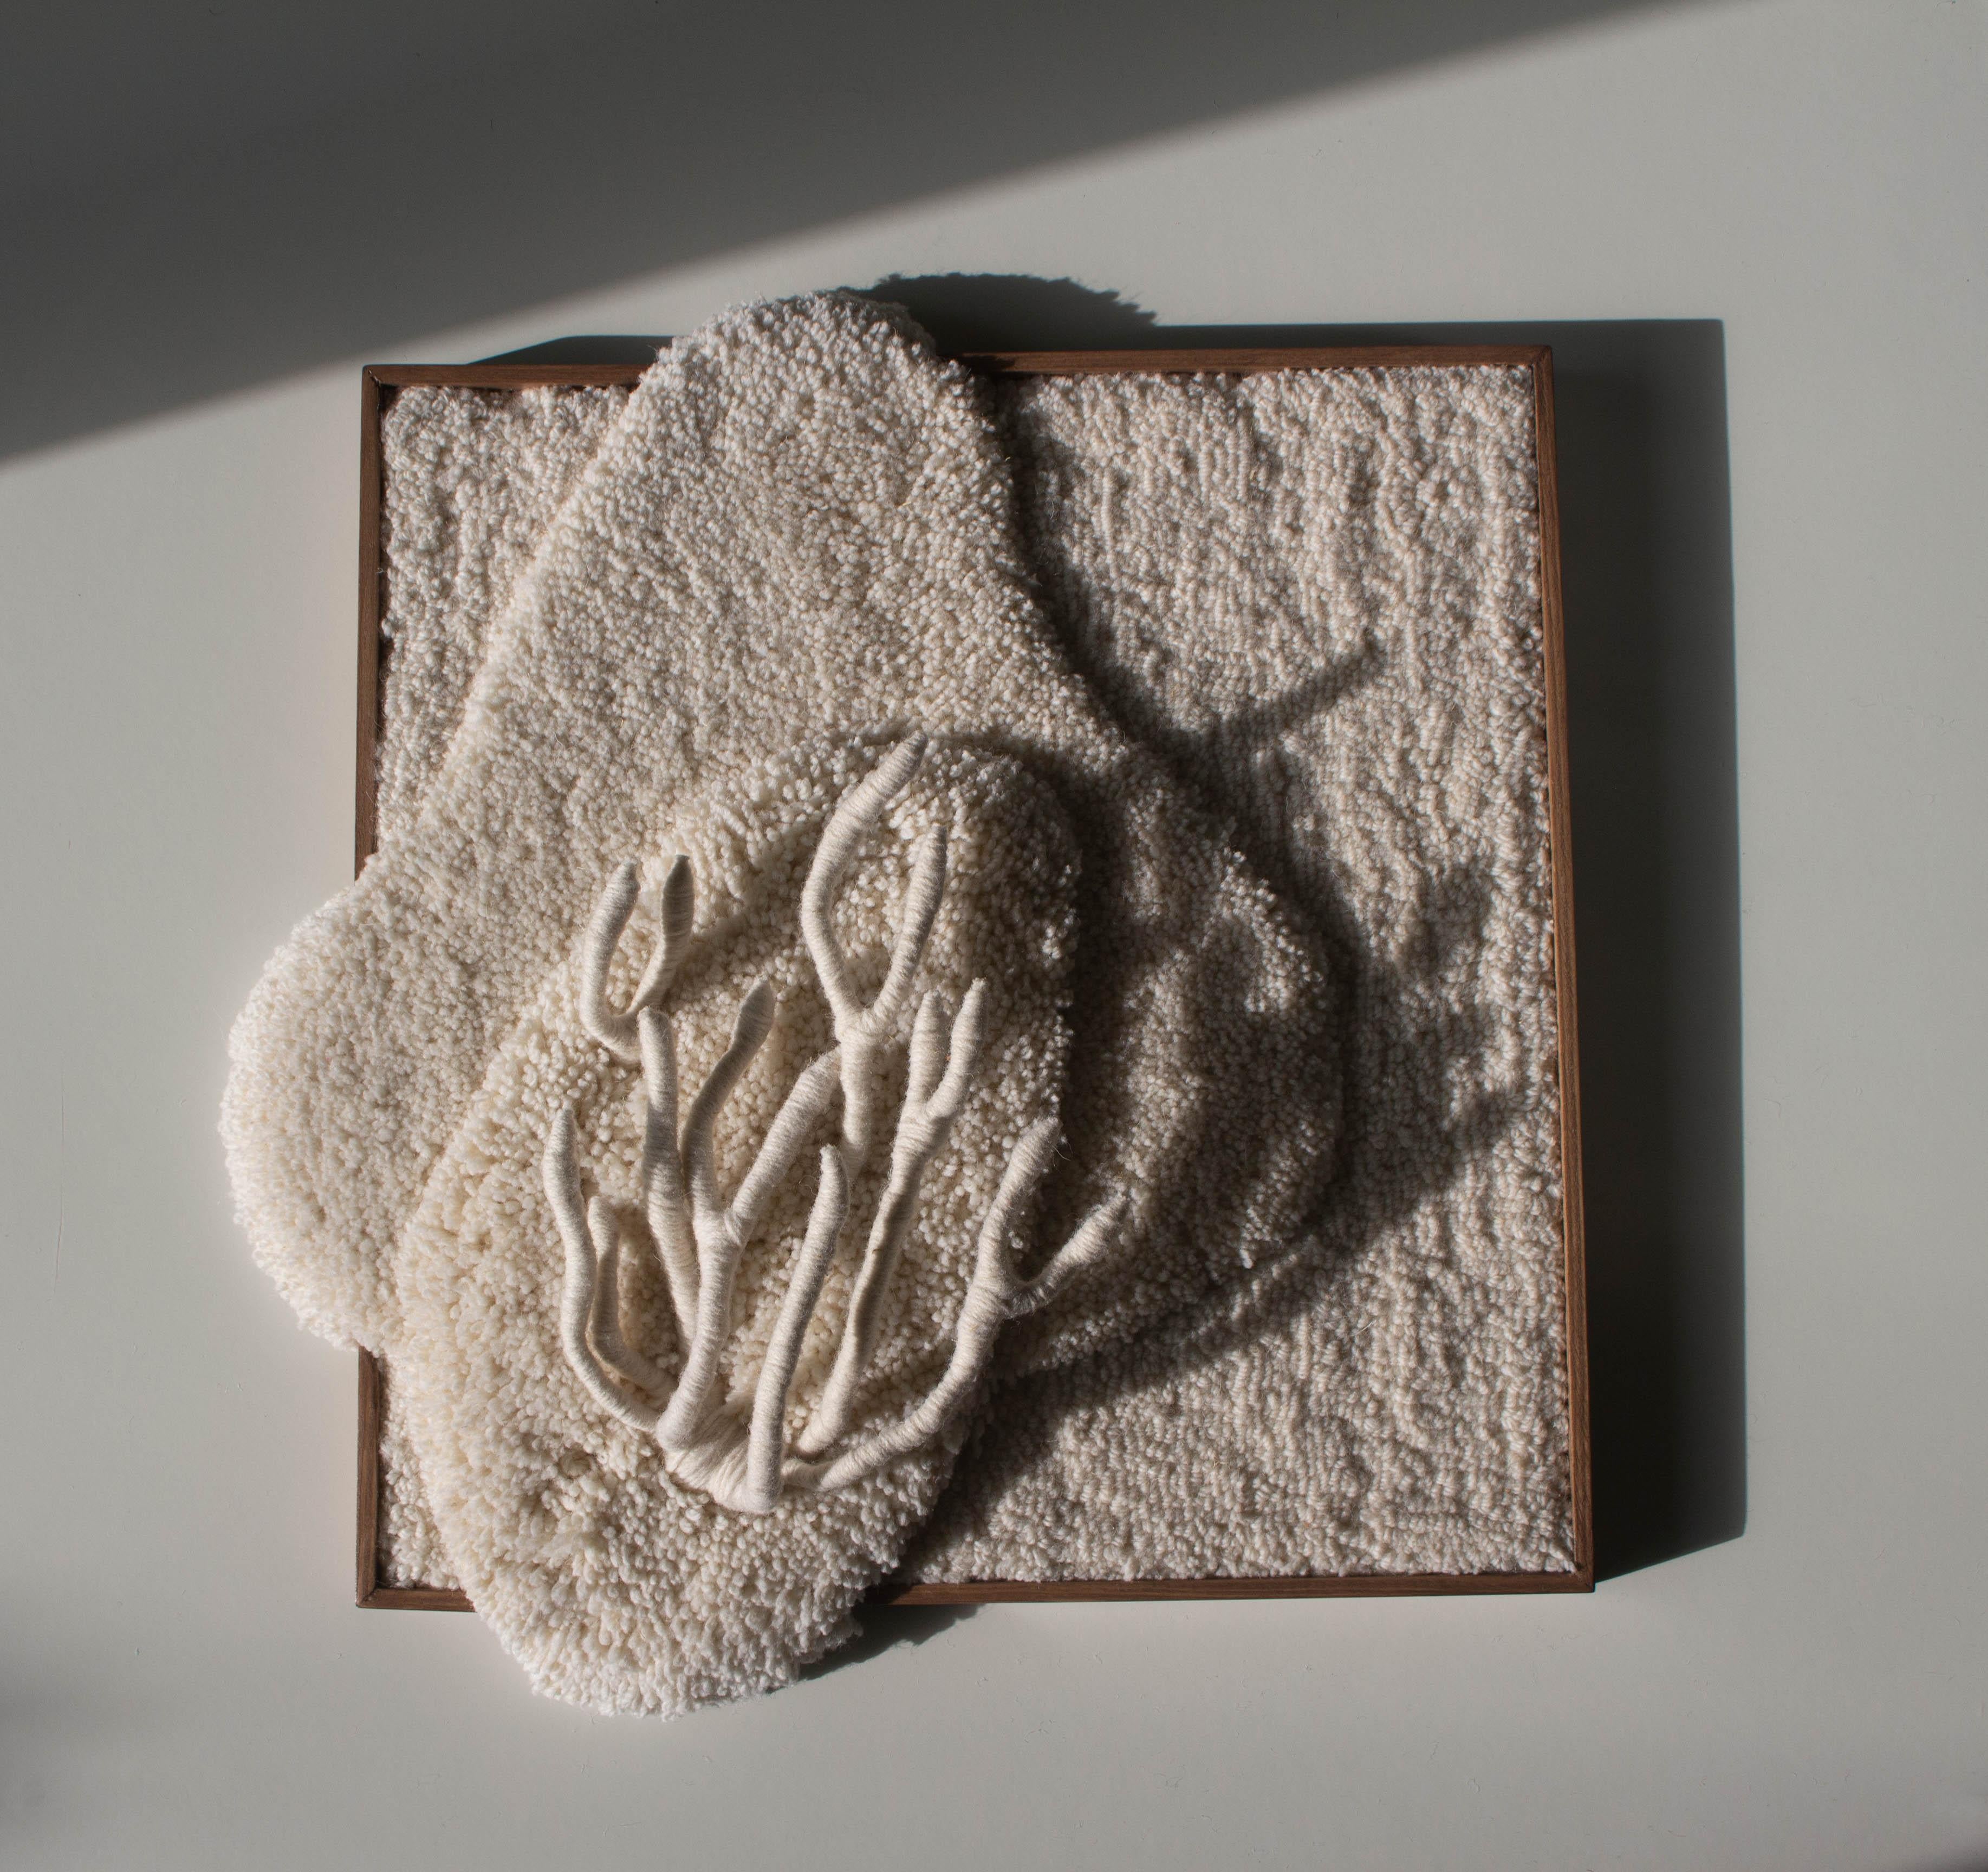 Bleached Anthozoa Tapestry is handmade with 100% Portuguese wool yarn, using tufting gun, carving and textile sculpture techniques. It has a 3D sculpture element and the pine frame, as part of the composition, is designed and produced by the studio.